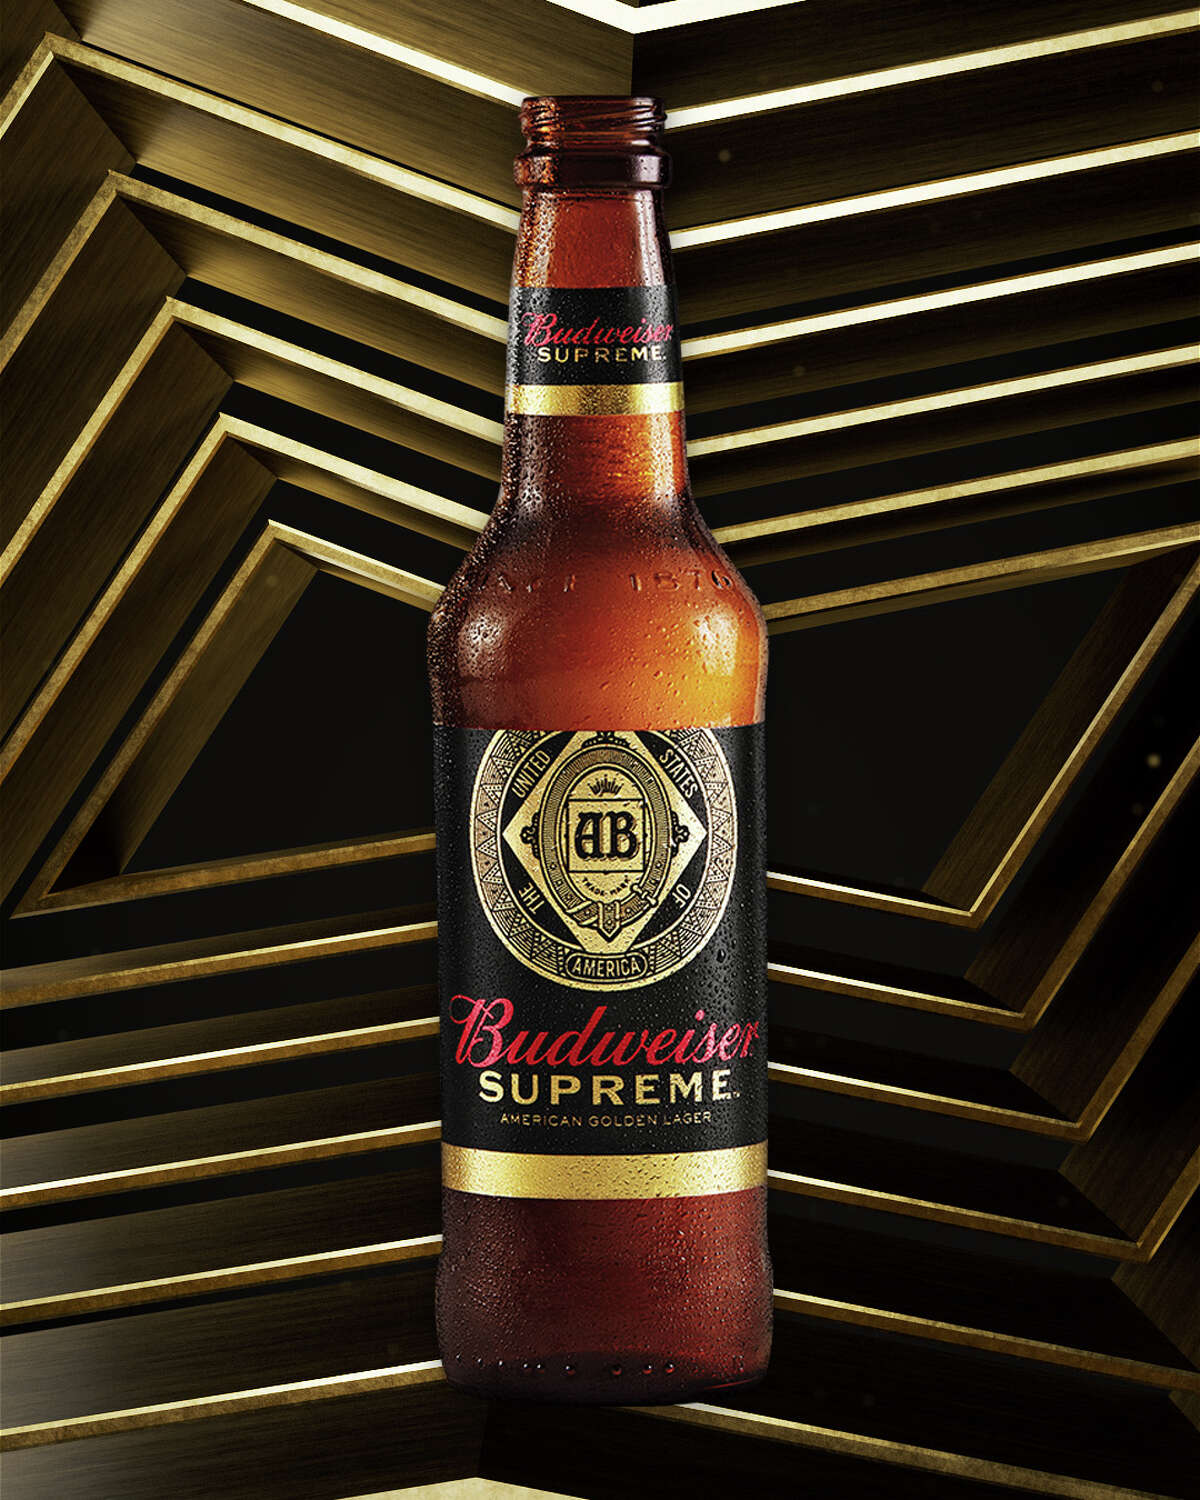 Budweiser Supreme is being tested in five different markets before going nationwide.